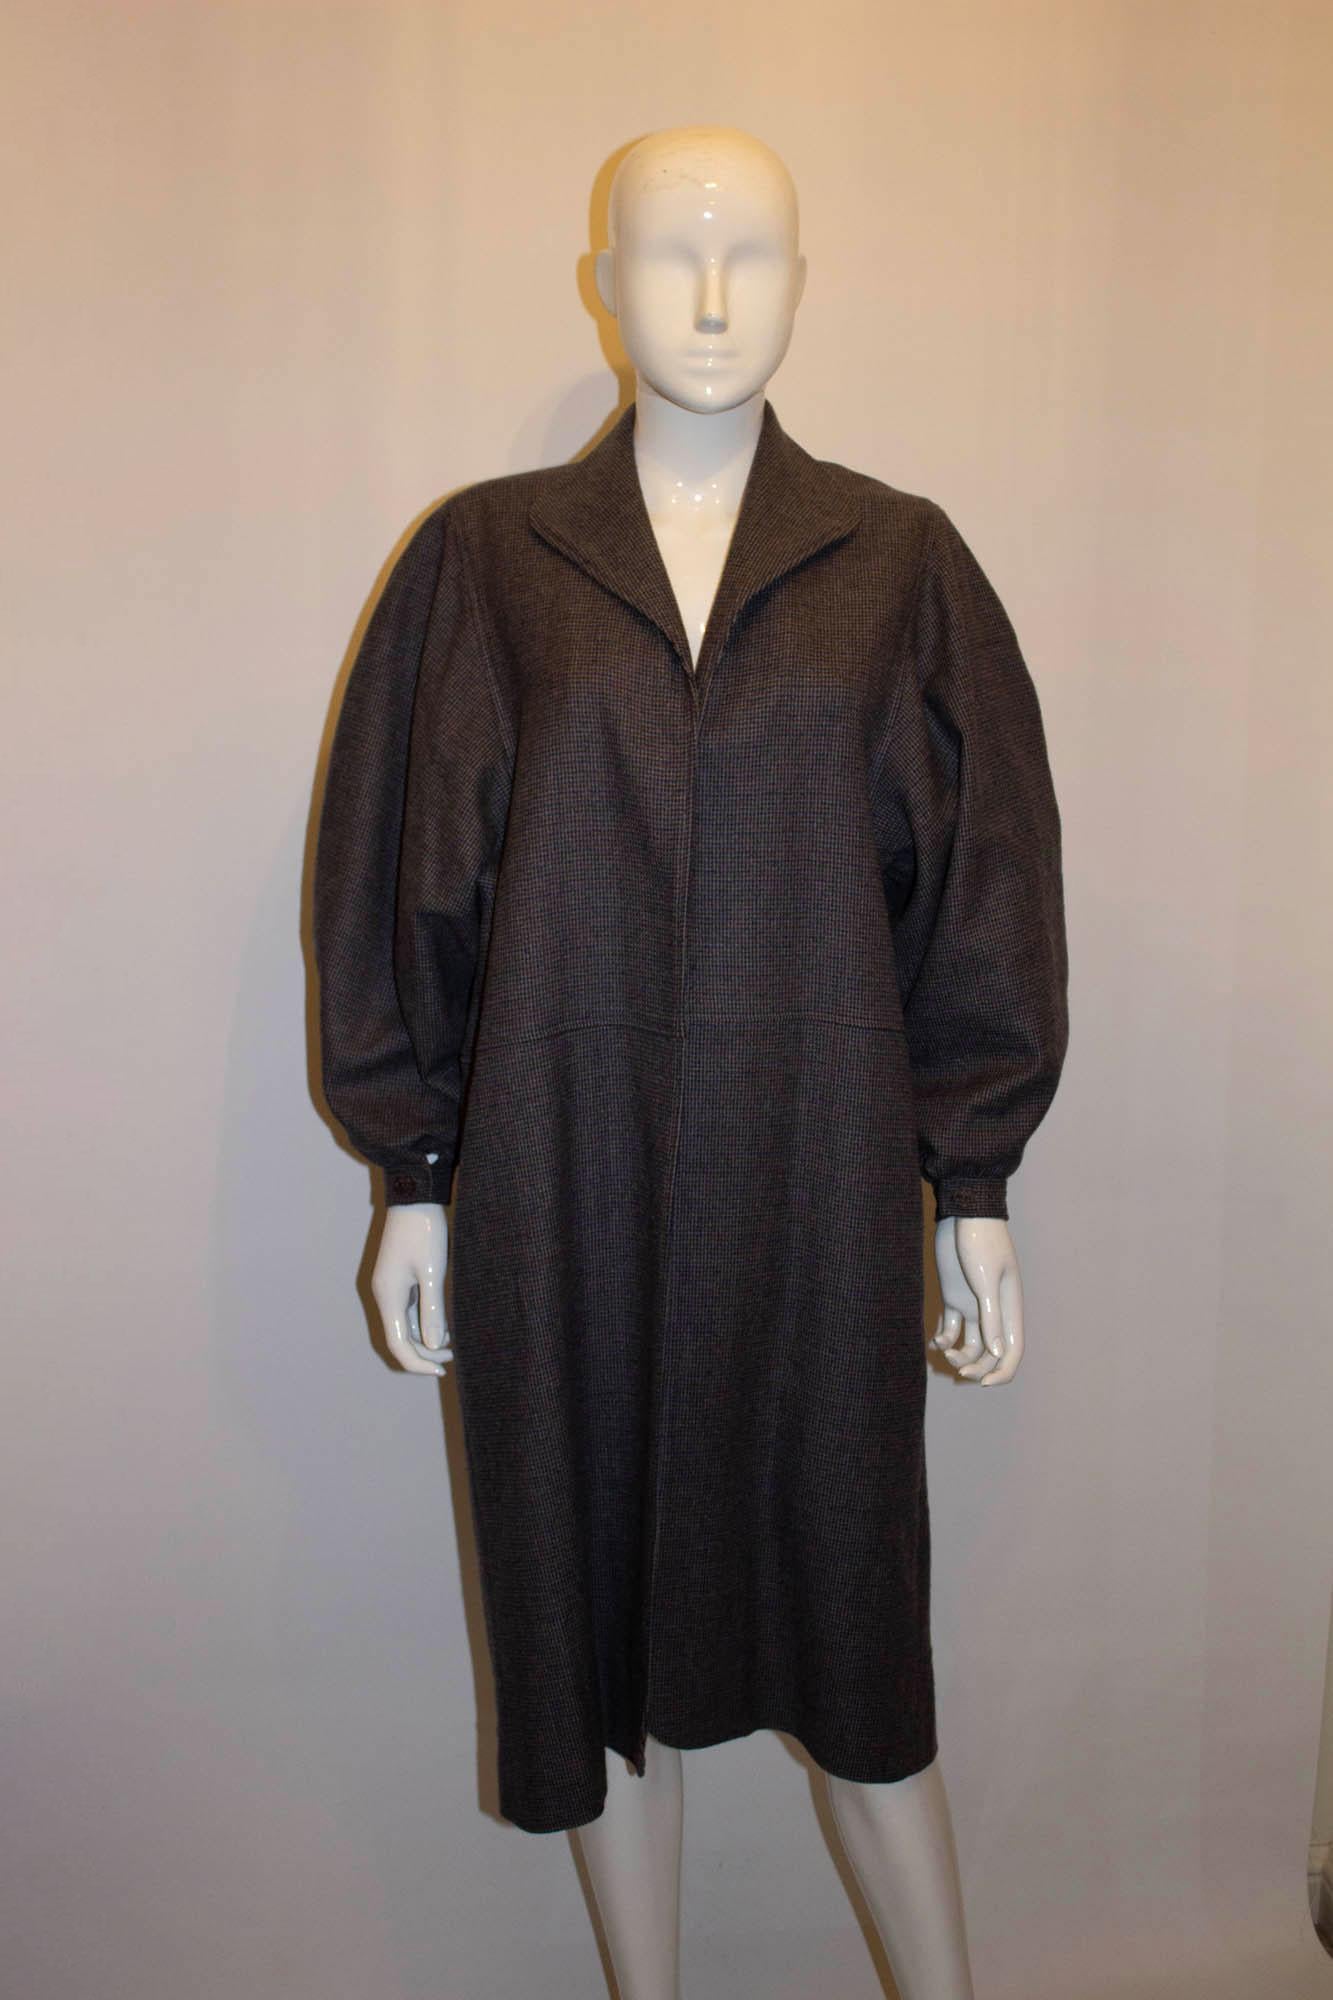 A fun vintage check wool coat by Jean Muir, main line.  The coat is in a blue ,brown and grey check, and is unlined. The coat has a single button cuff and a pocket on either side. 
UK size 10 , measurements; bust up to 42'', length 43''